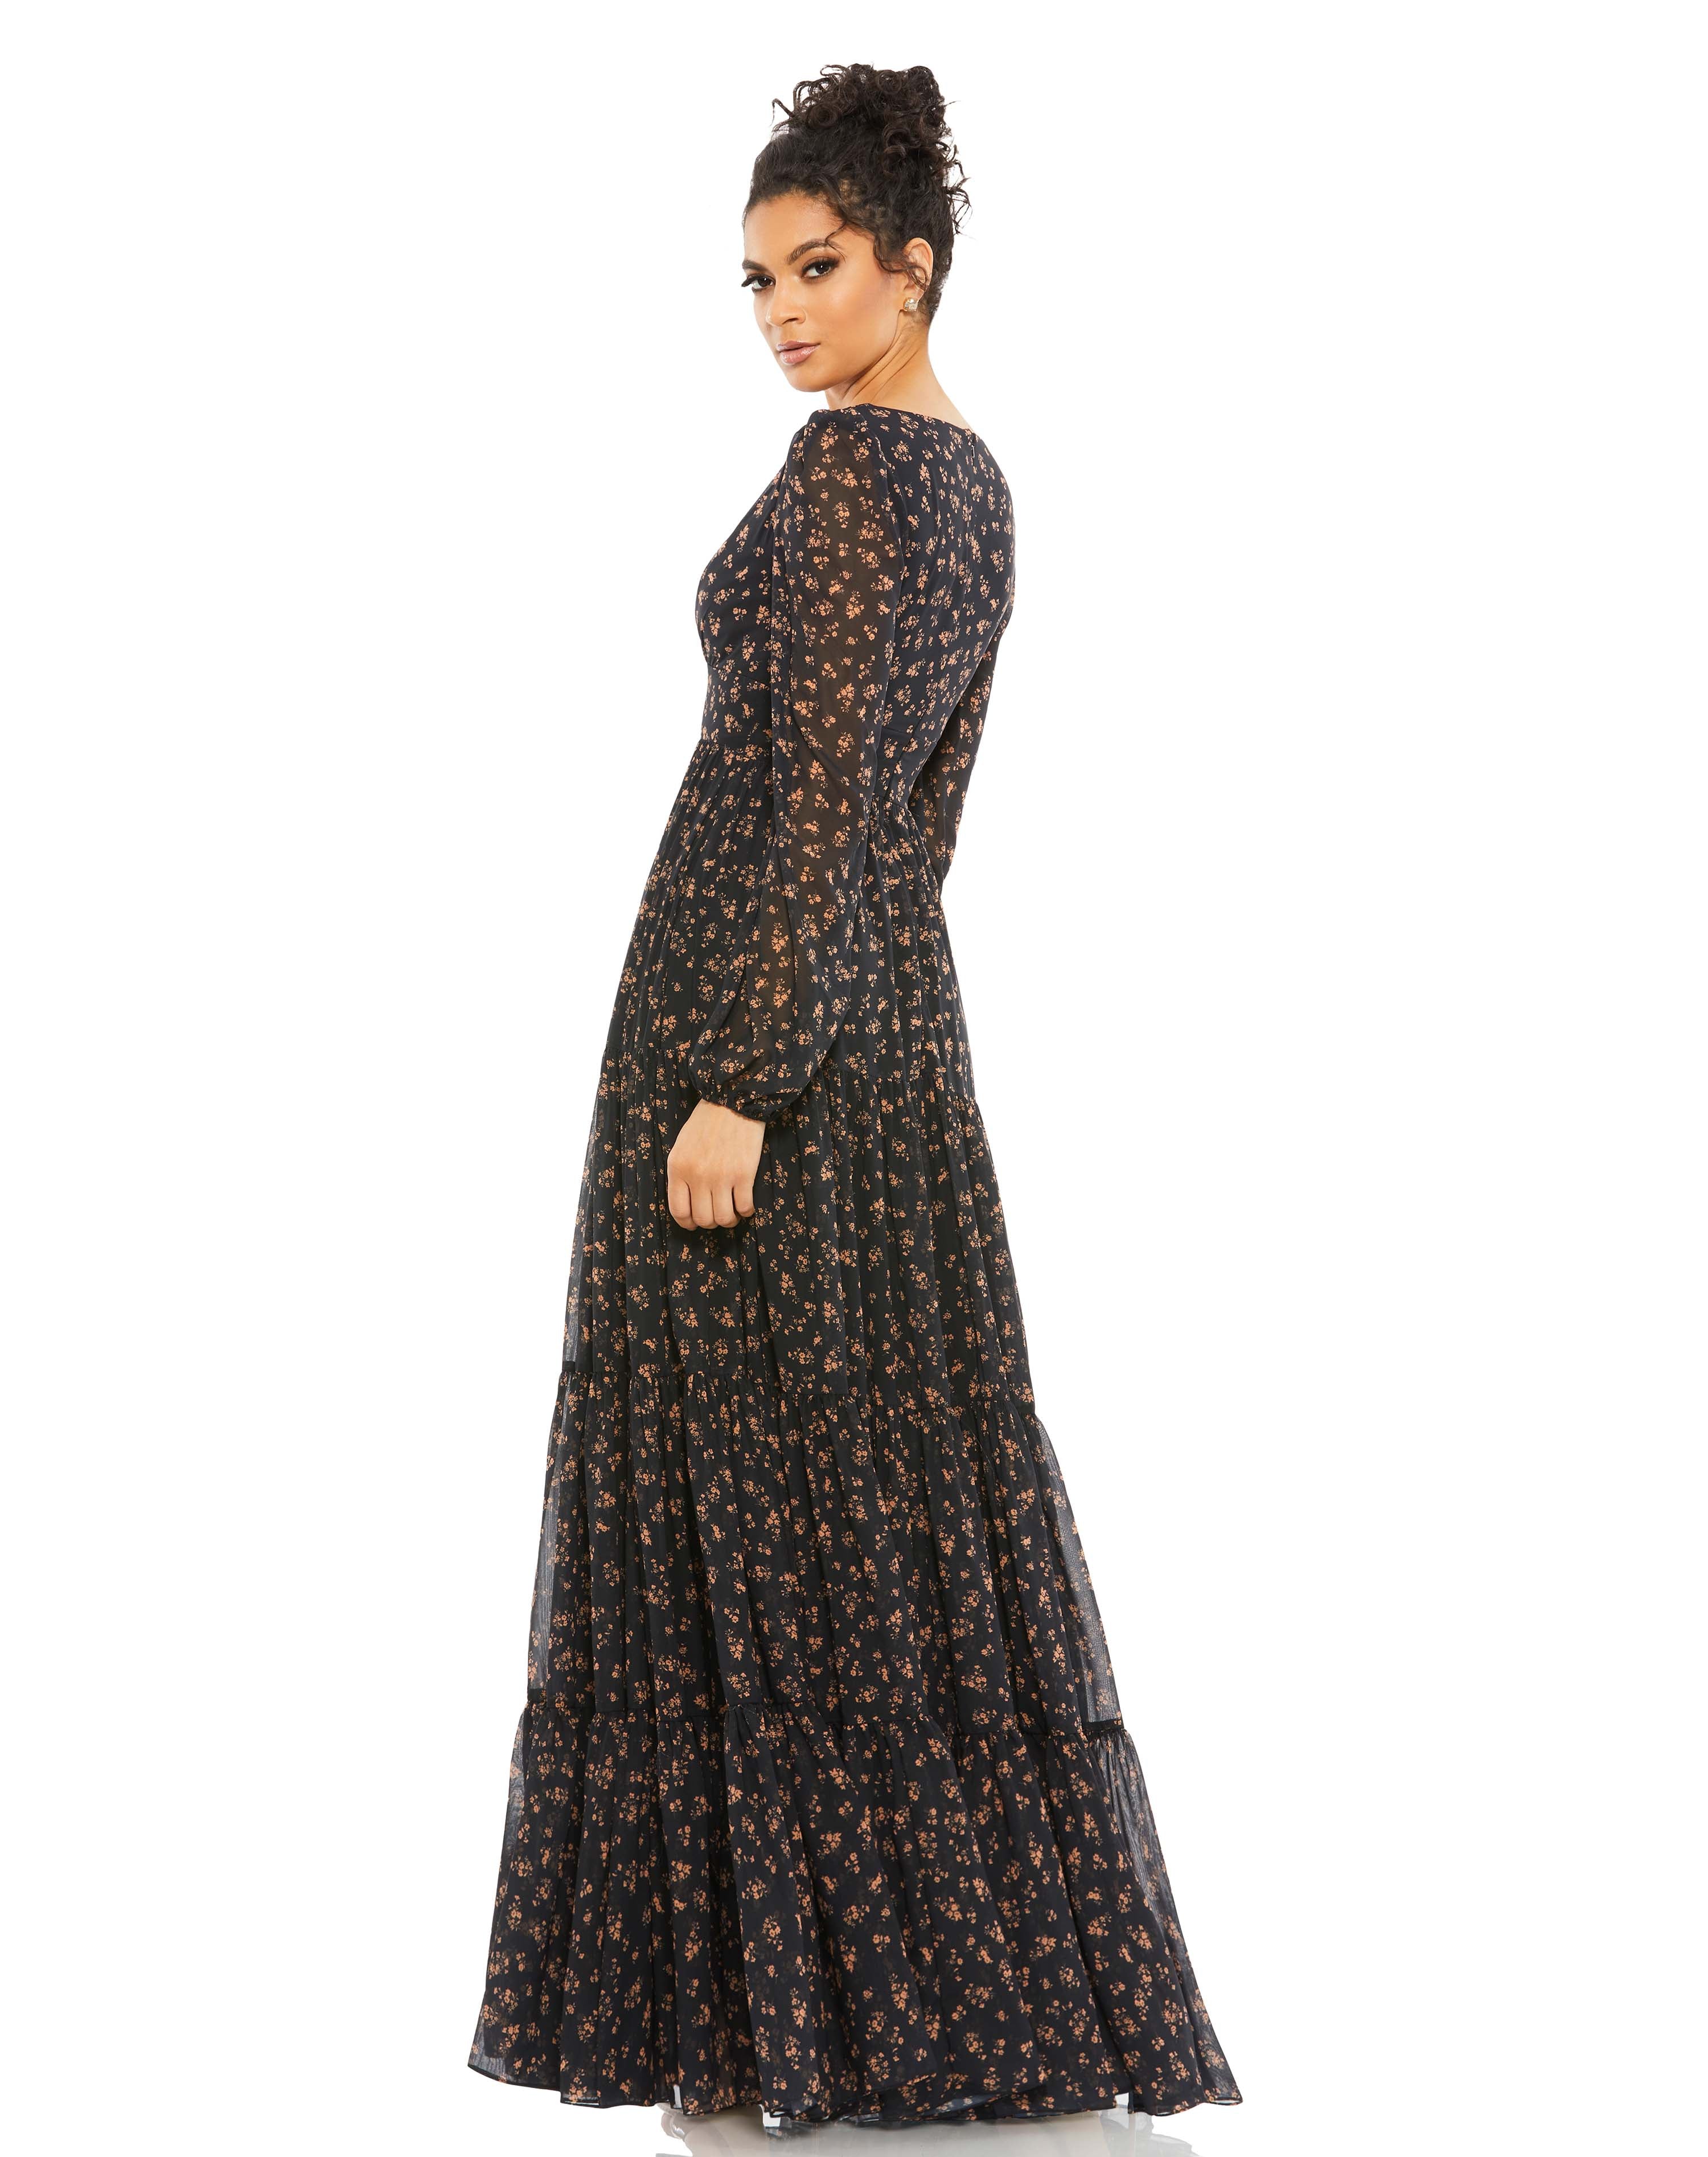 Floral Tiered Long Sleeve Maxi Dress - FINAL SALE